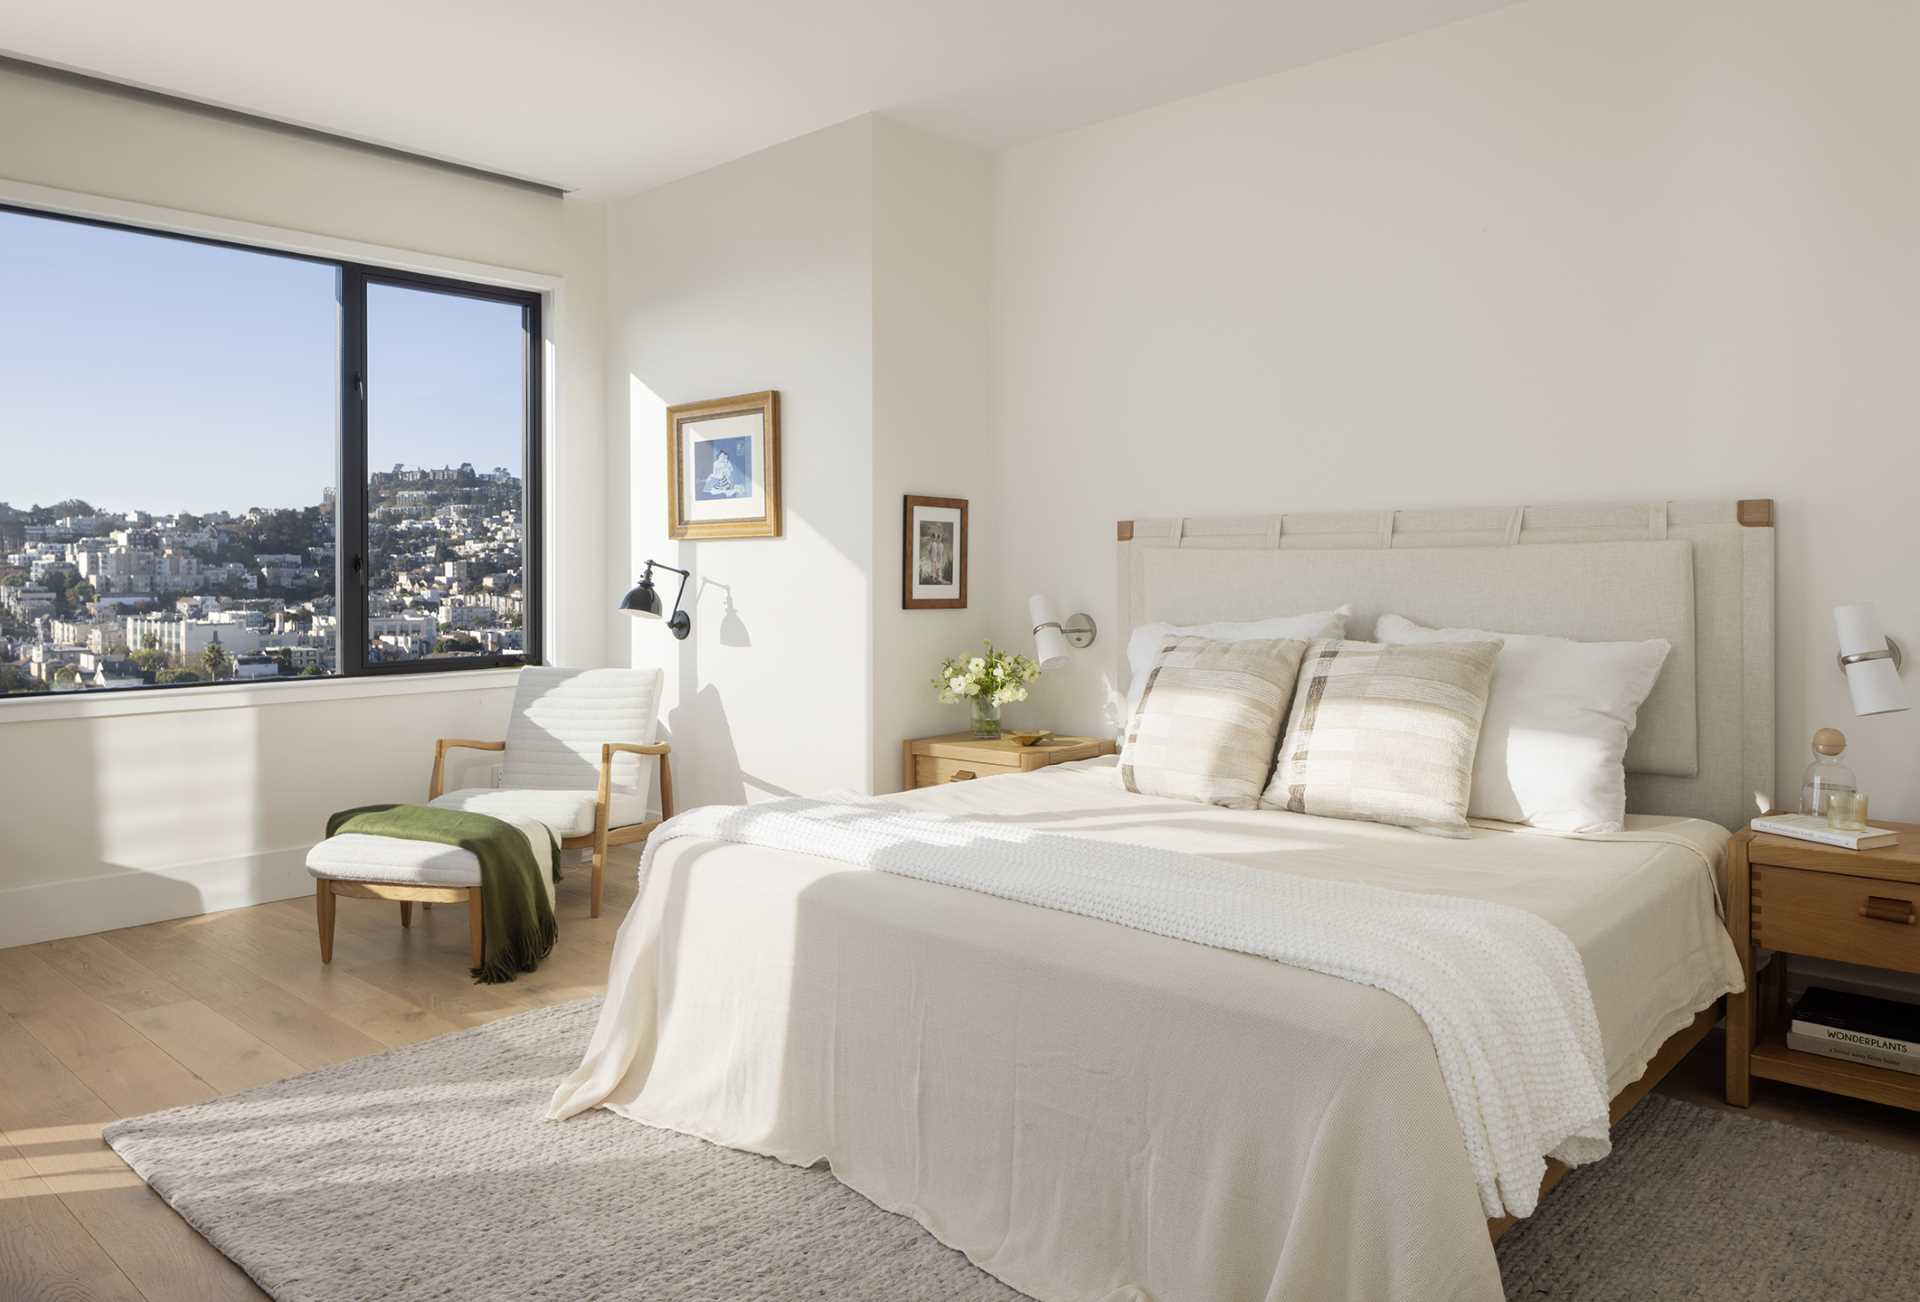 In a bedroom with wood floors, the color palette has been kept neutral to allow the views to be the focal point.